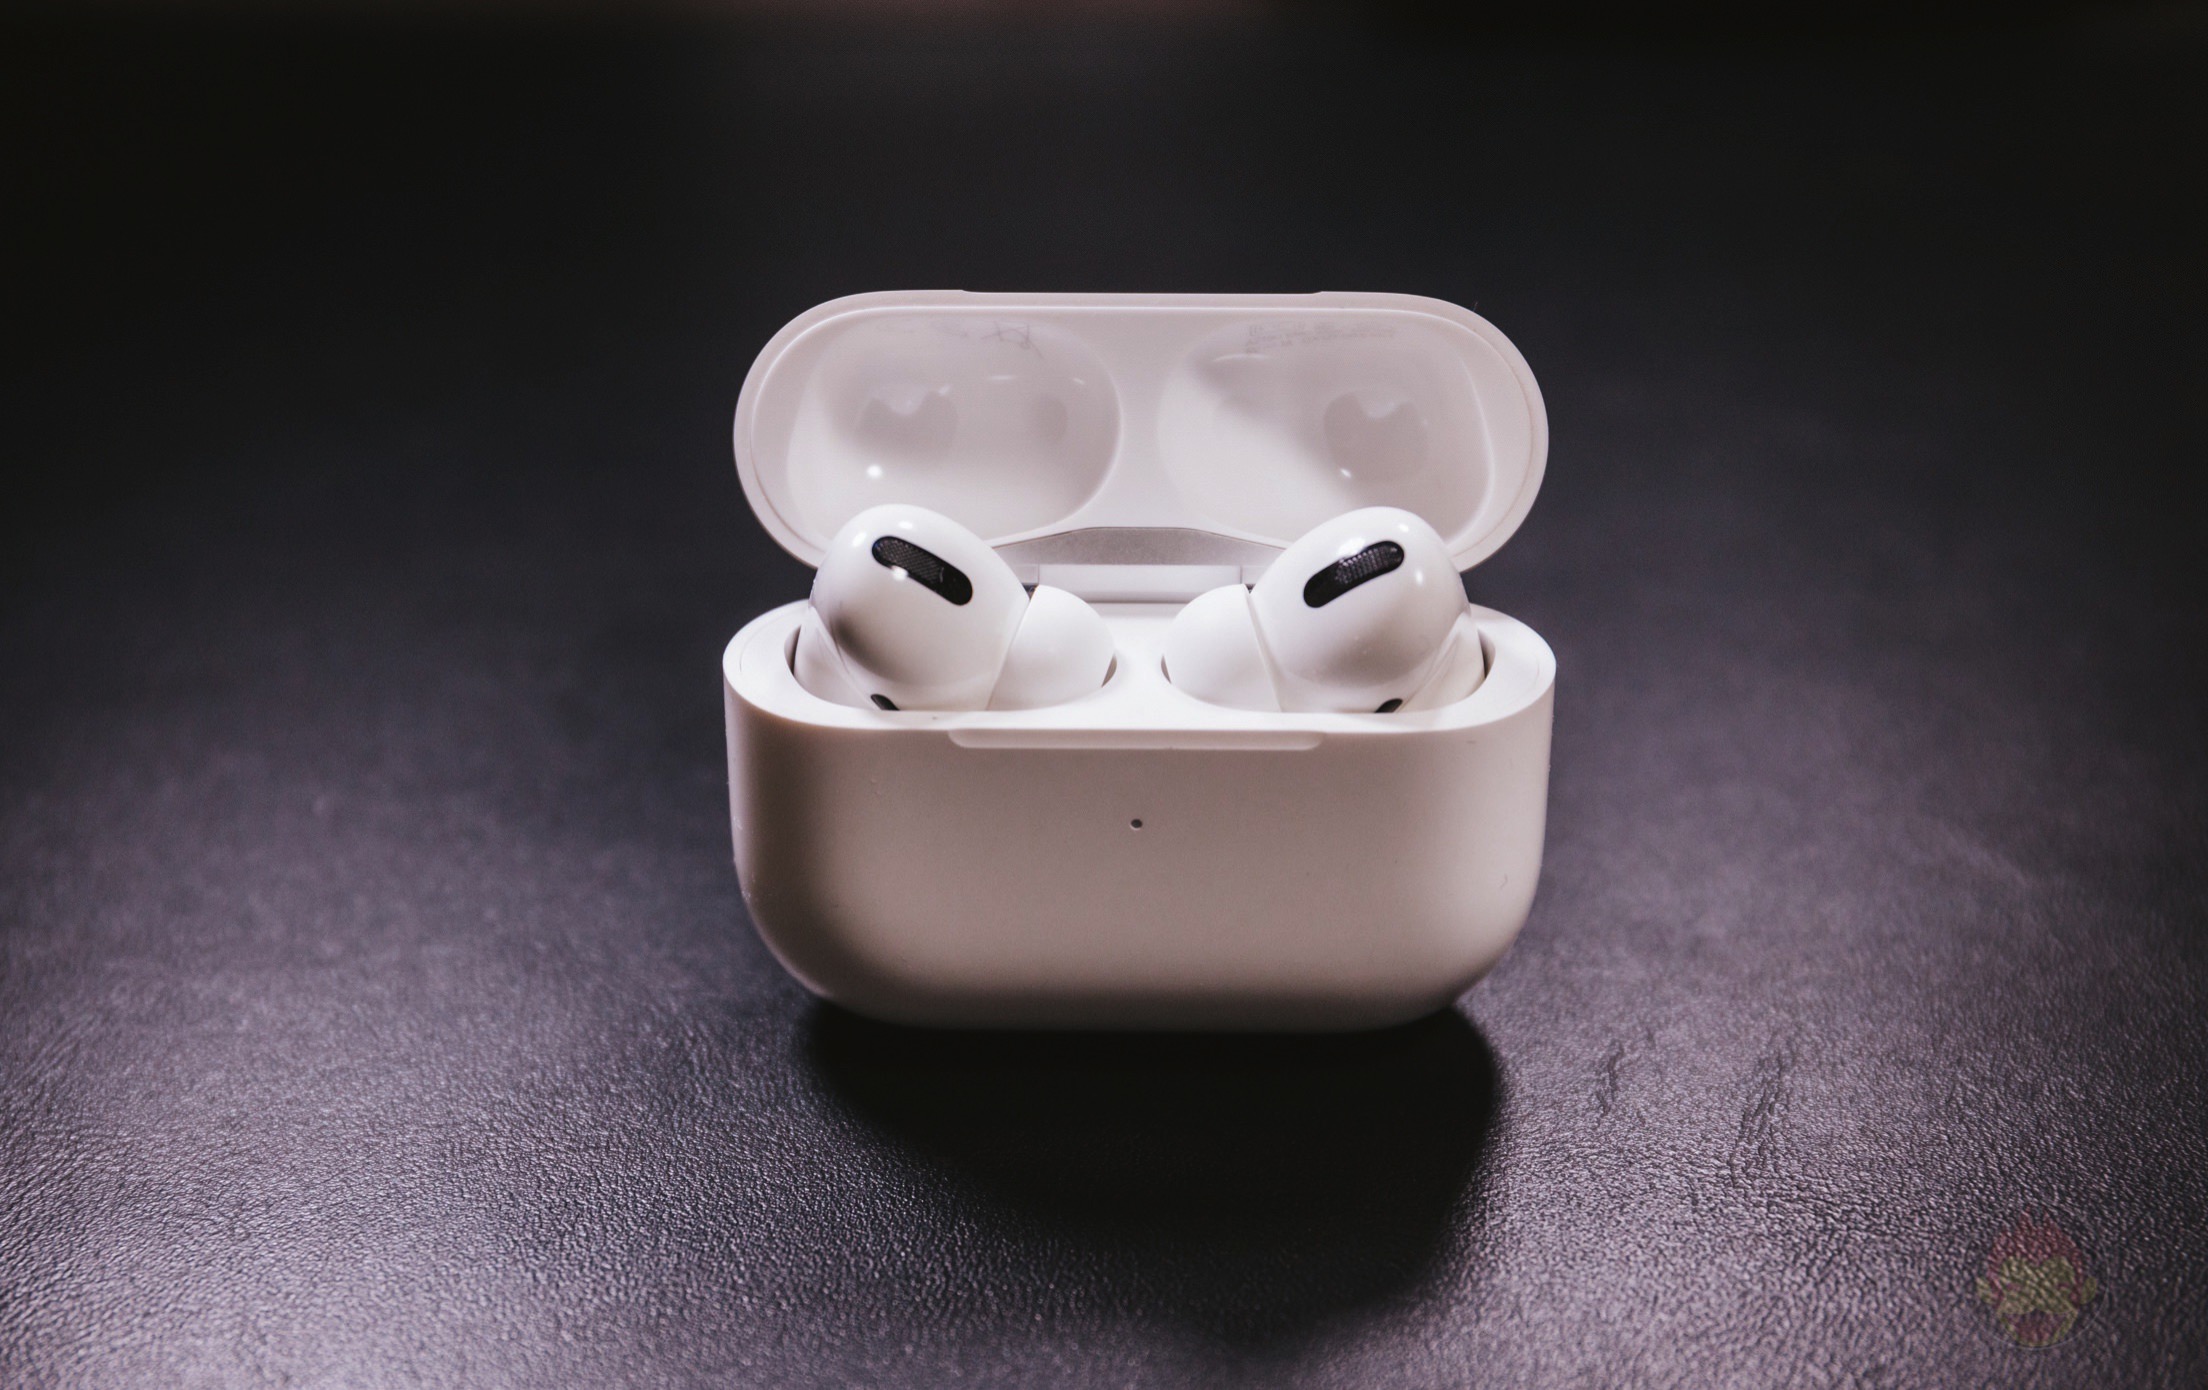 AirPods-Pro-2019-Review-21.jpg